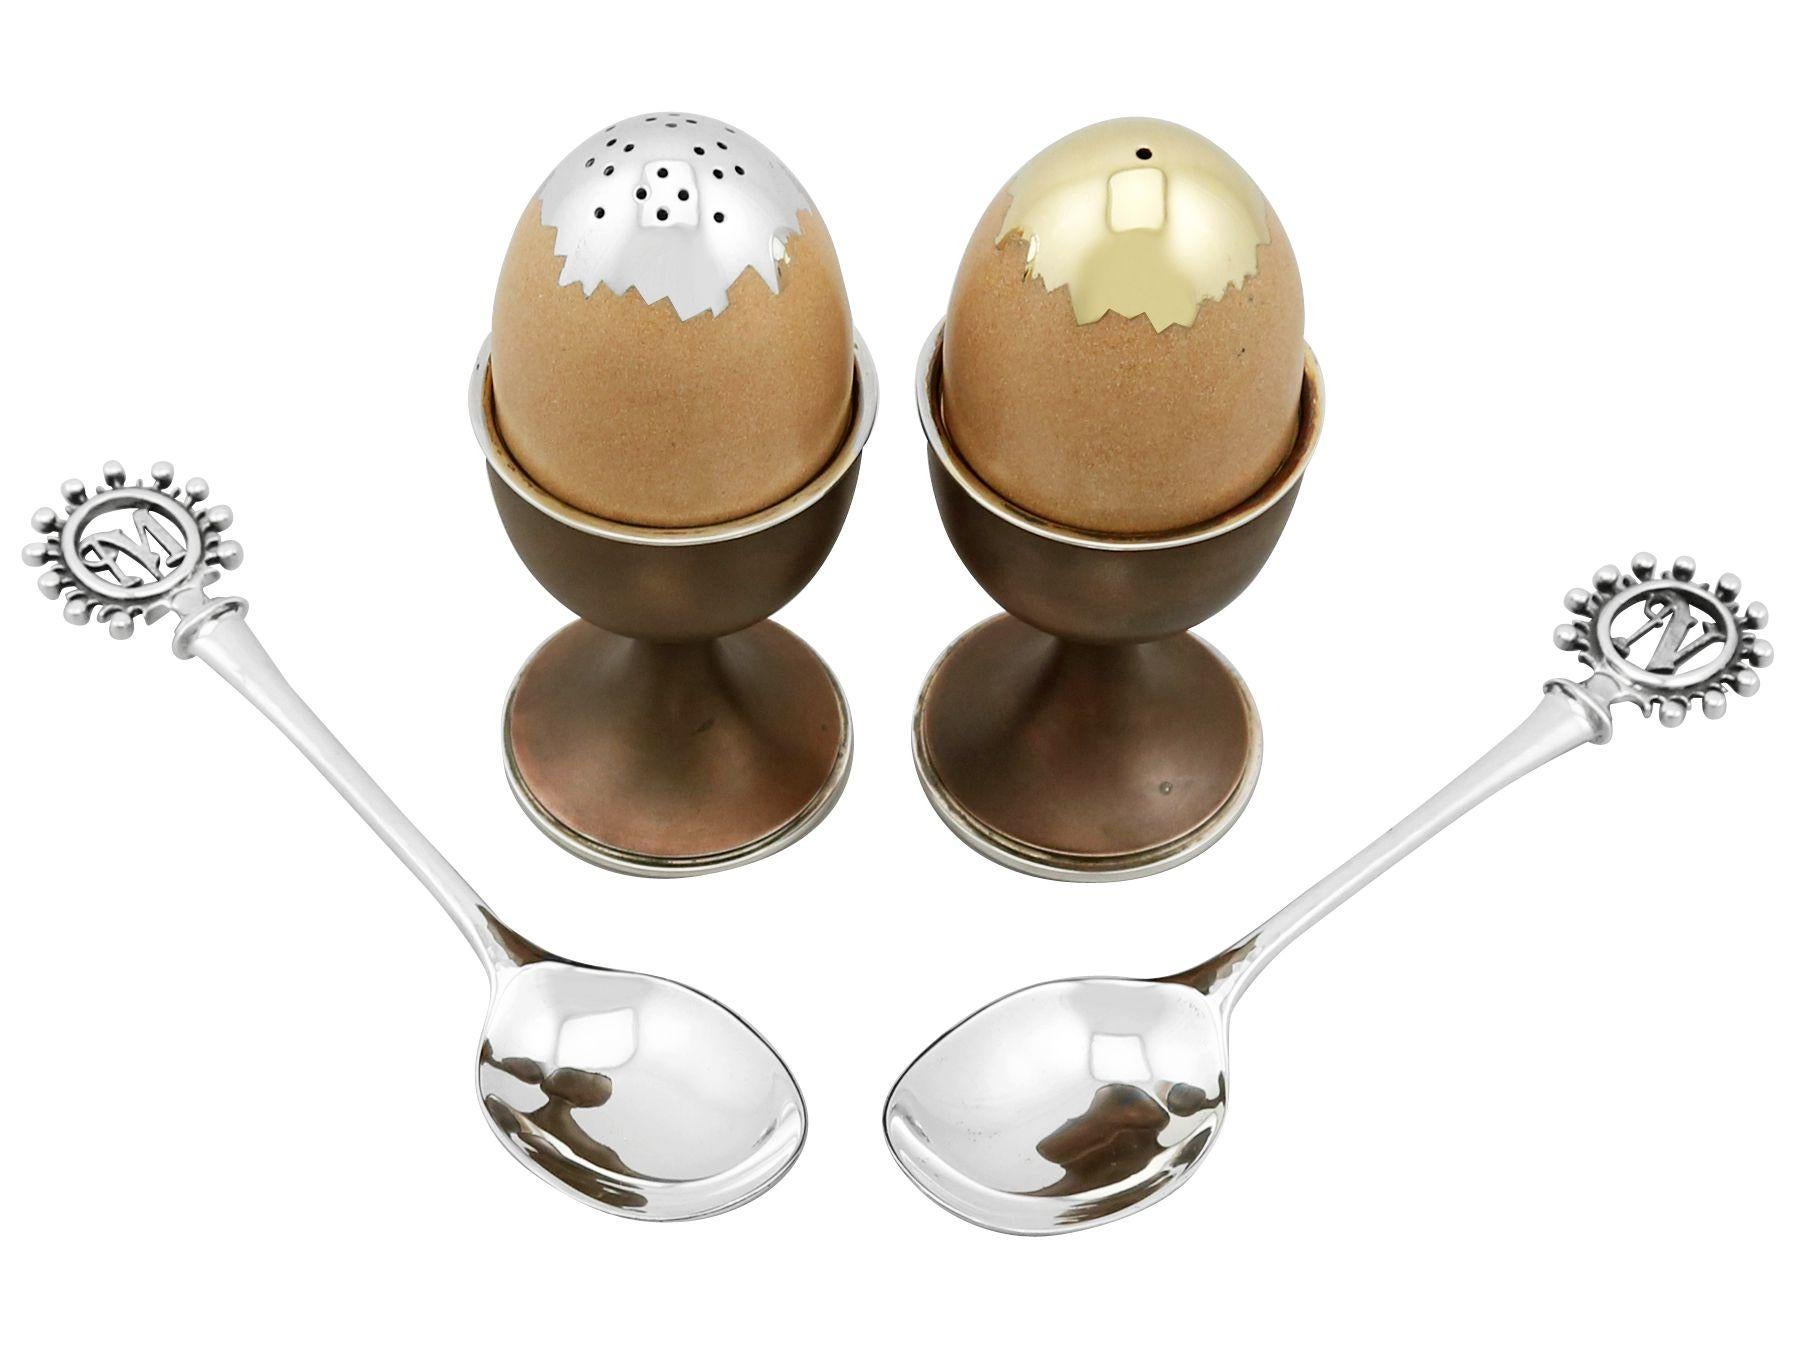 An exceptional, fine and impressive, pair of vintage English cast sterling silver and enamel salt and pepper set, in the form of a soft boiled egg in an egg holder - boxed; an addition to our silver cruets or condiments collection.
These exceptional